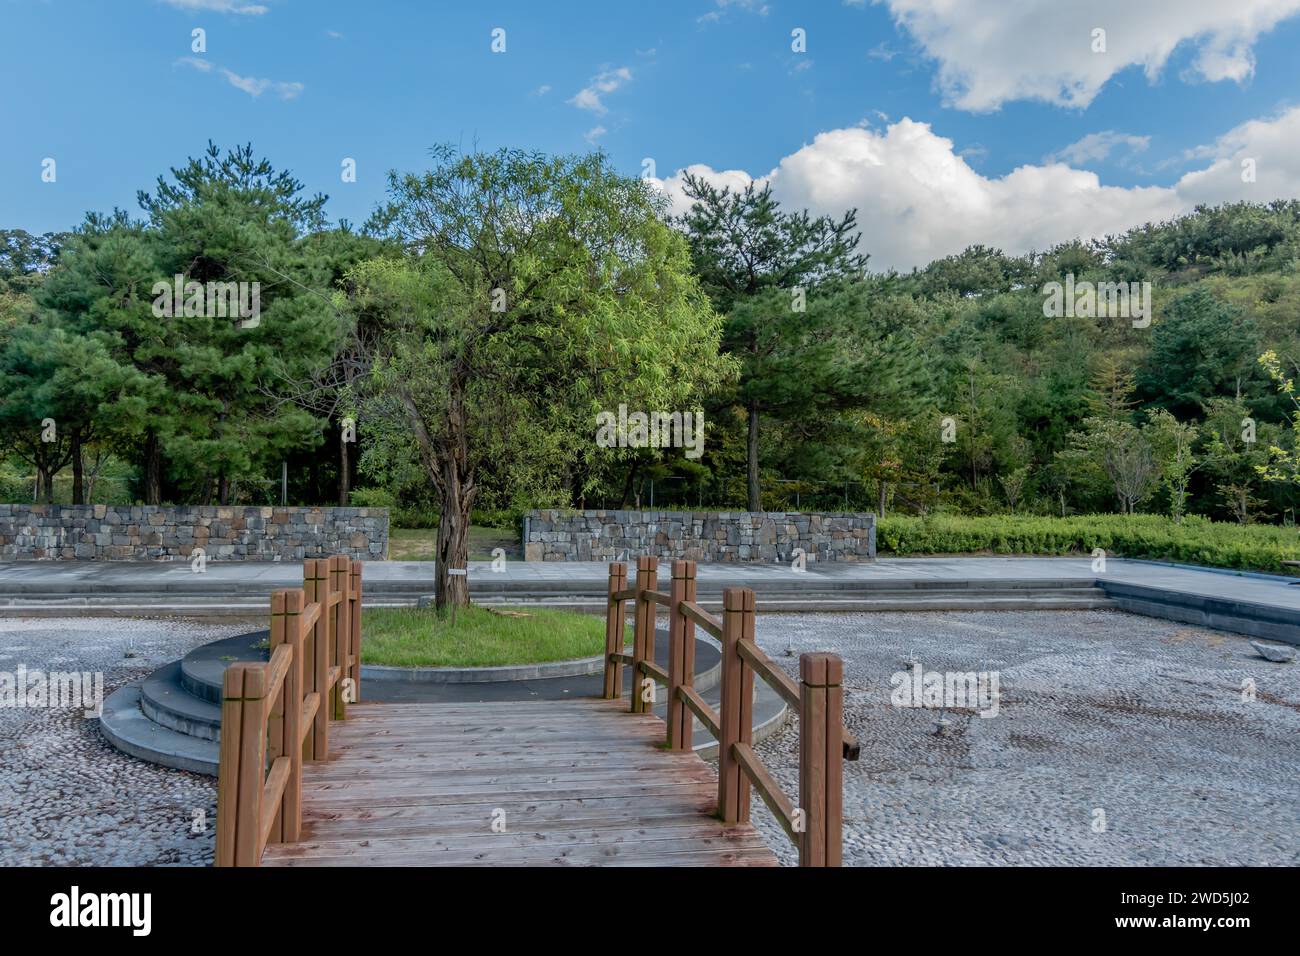 Tree in circular piece of ground at end of wooden bridge over dry fountain with forest in background, South Korea Stock Photo